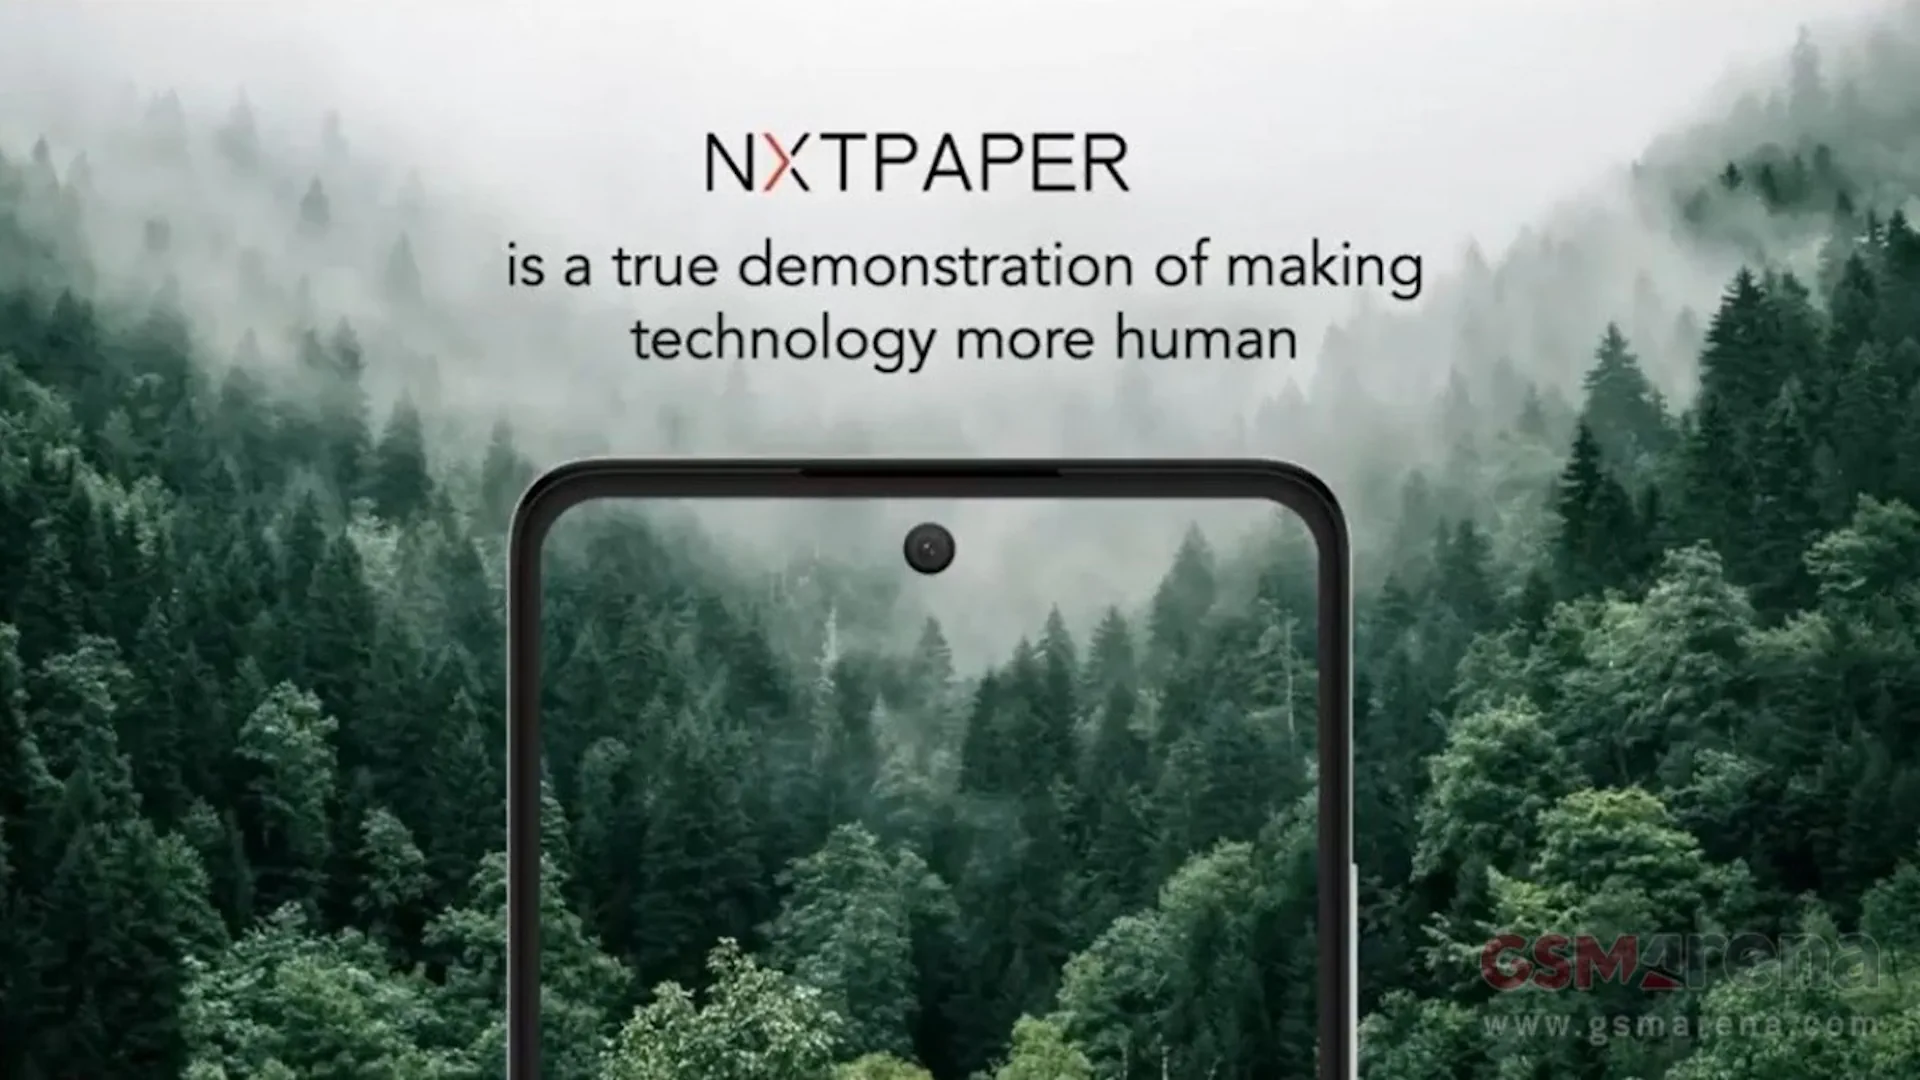 TCL’s new NXTPAPER 3.0 screen technology is said to improve visual health